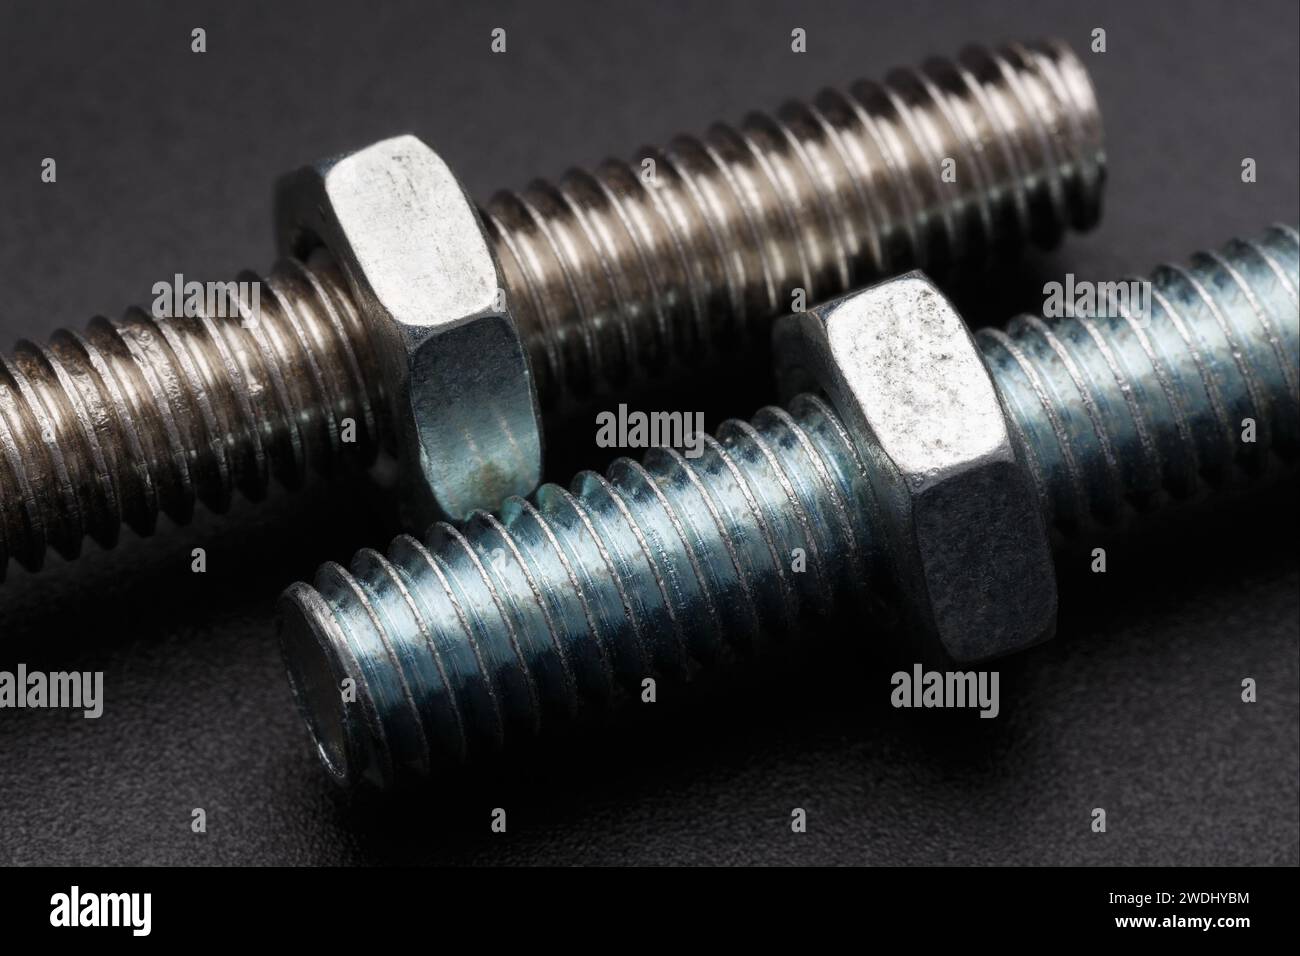 Two oxidized bolts with nuts close-up on a dark background. Macro photography Stock Photo